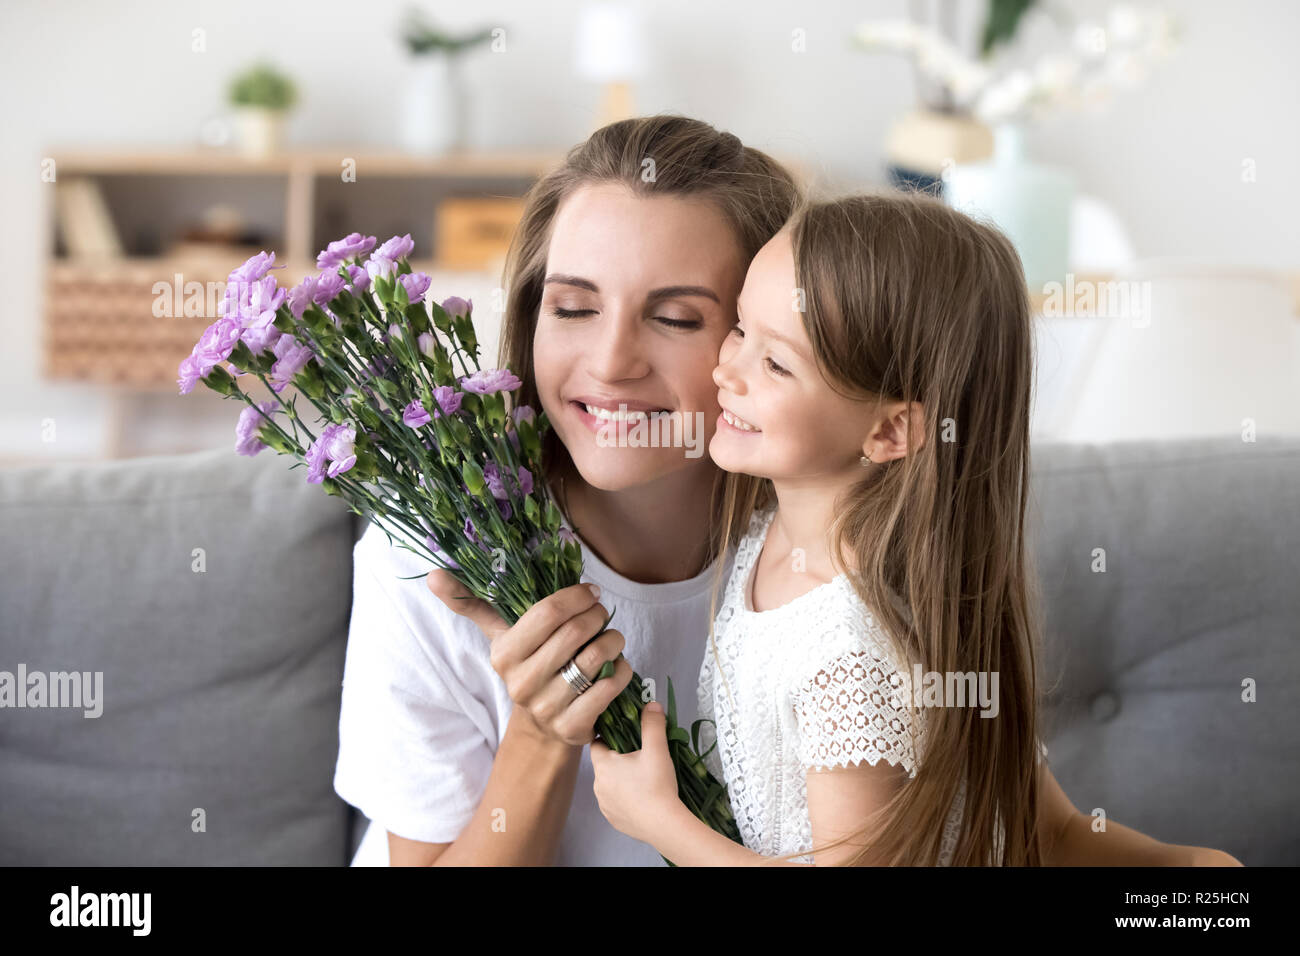 Smiling kid daughter giving flowers congratulating mom with moth Stock Photo